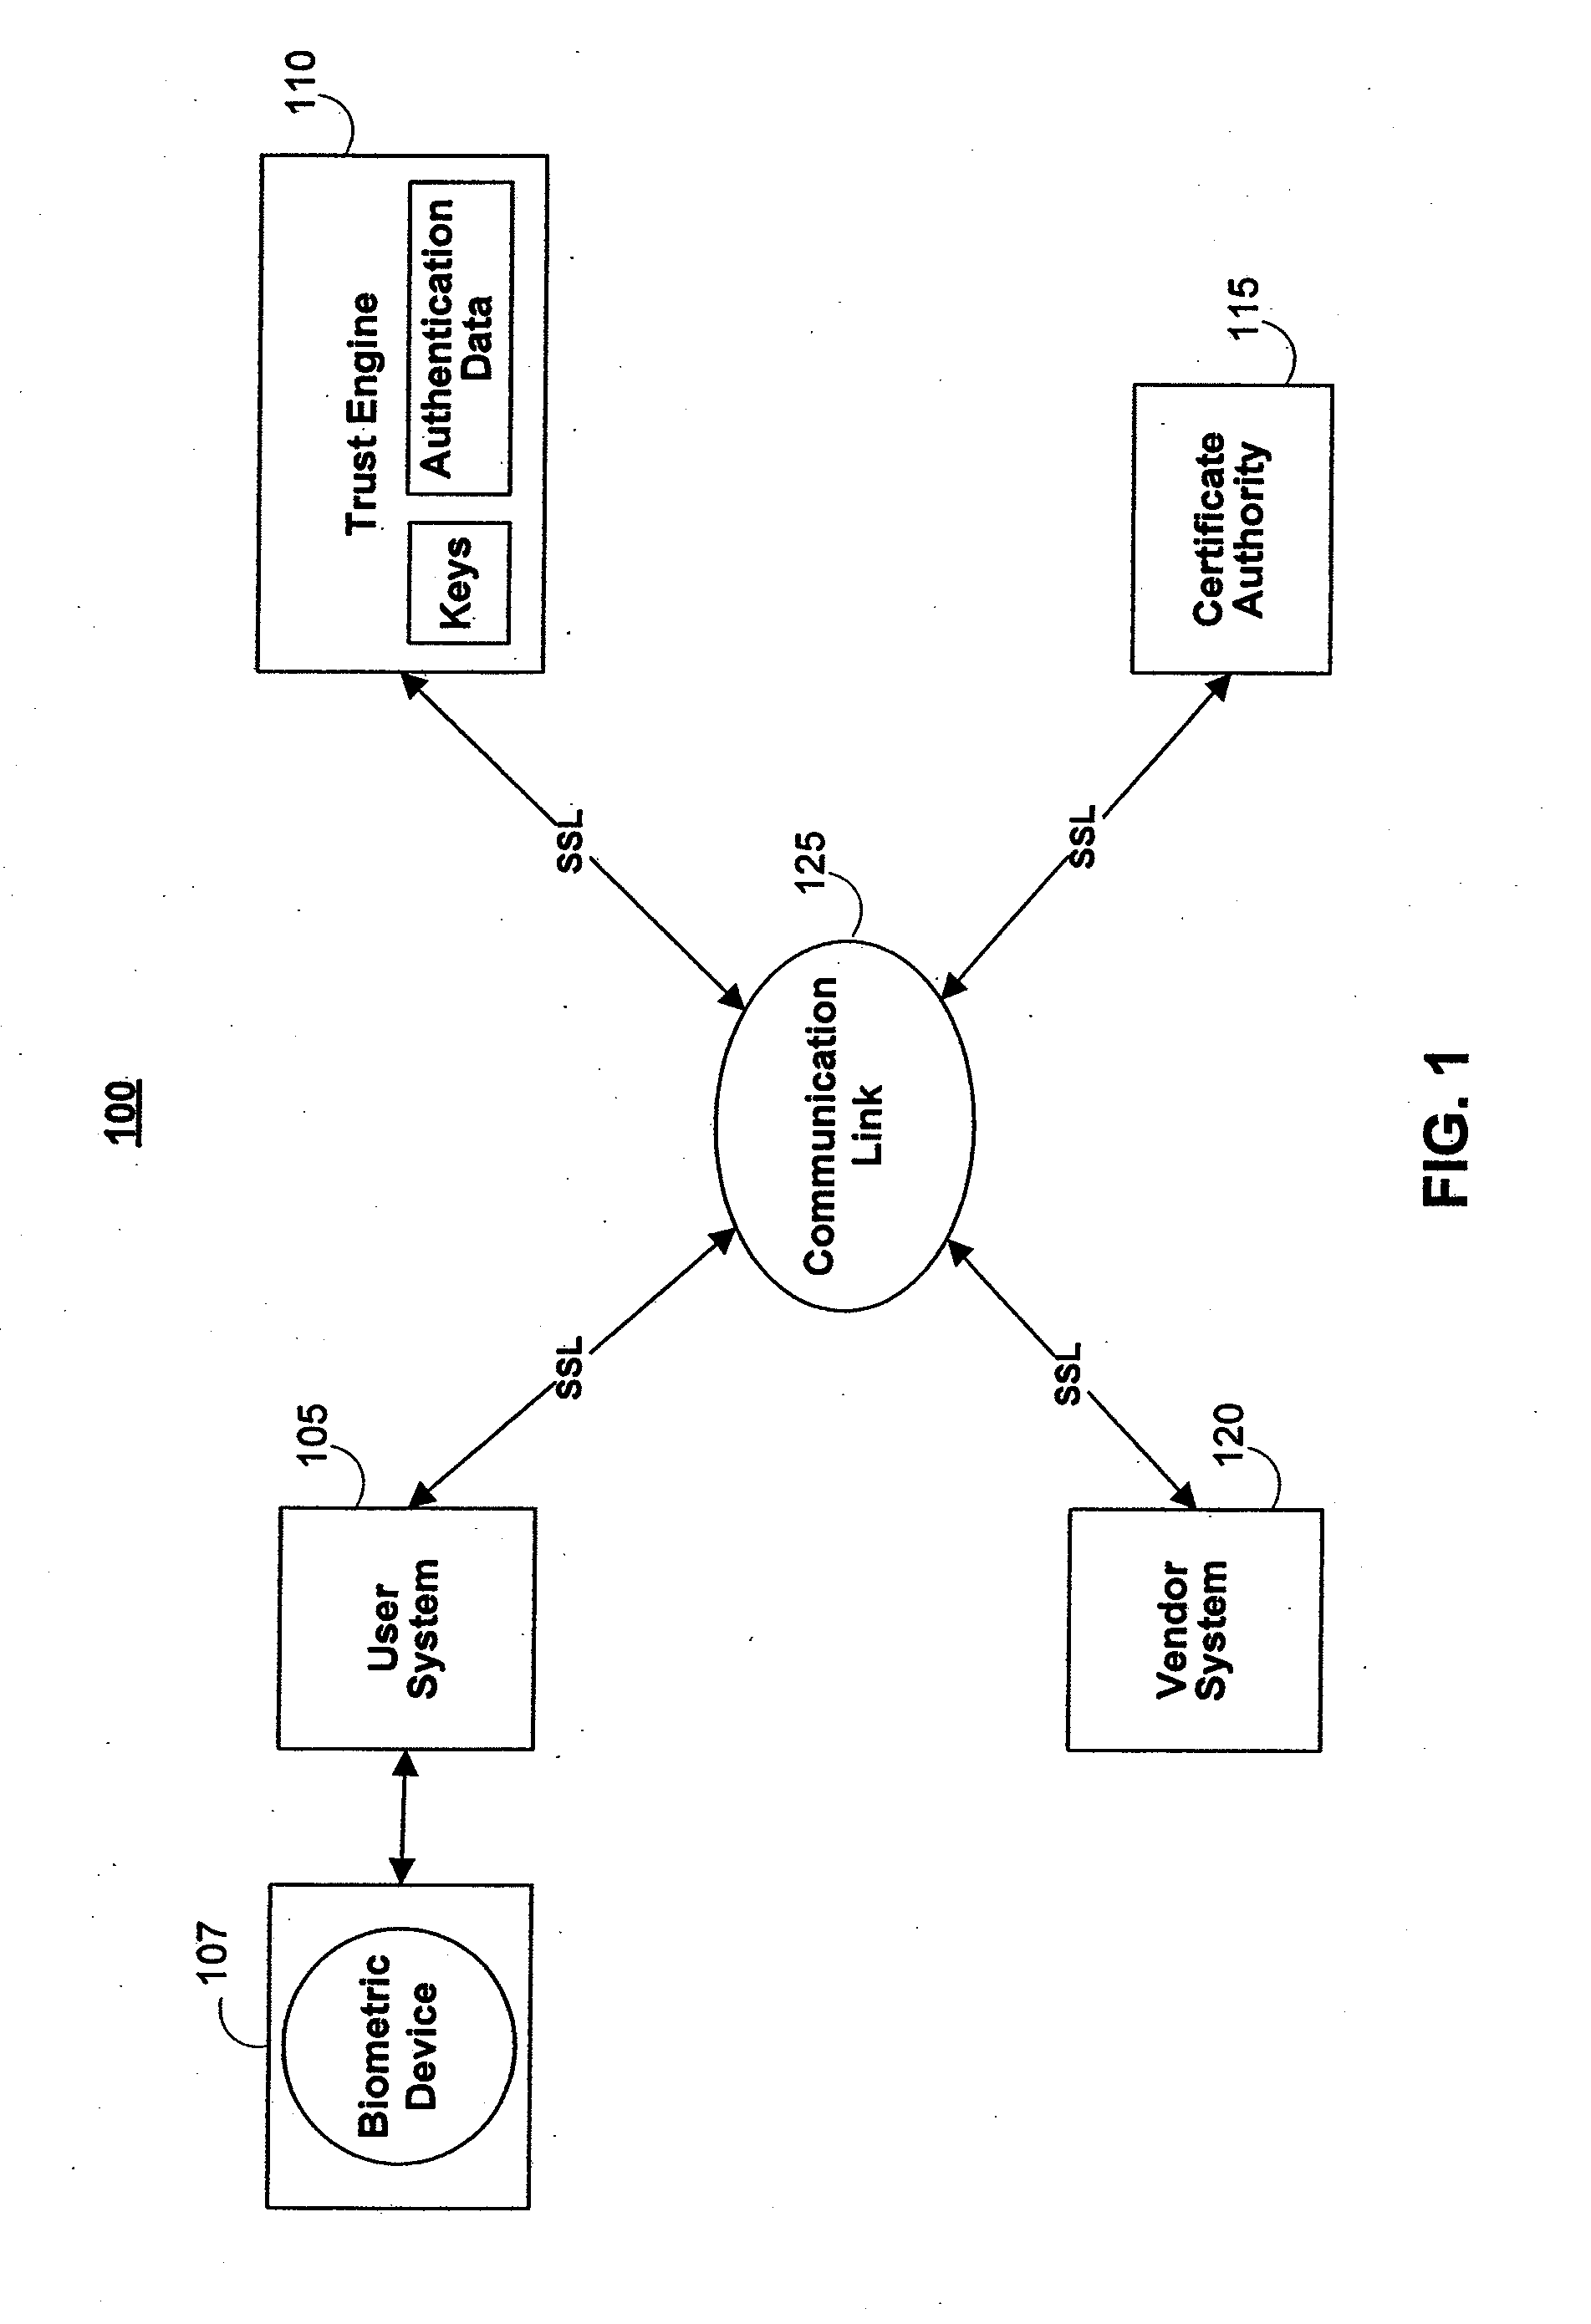 Systems and methods for securing data using multi-factor or keyed dispersal